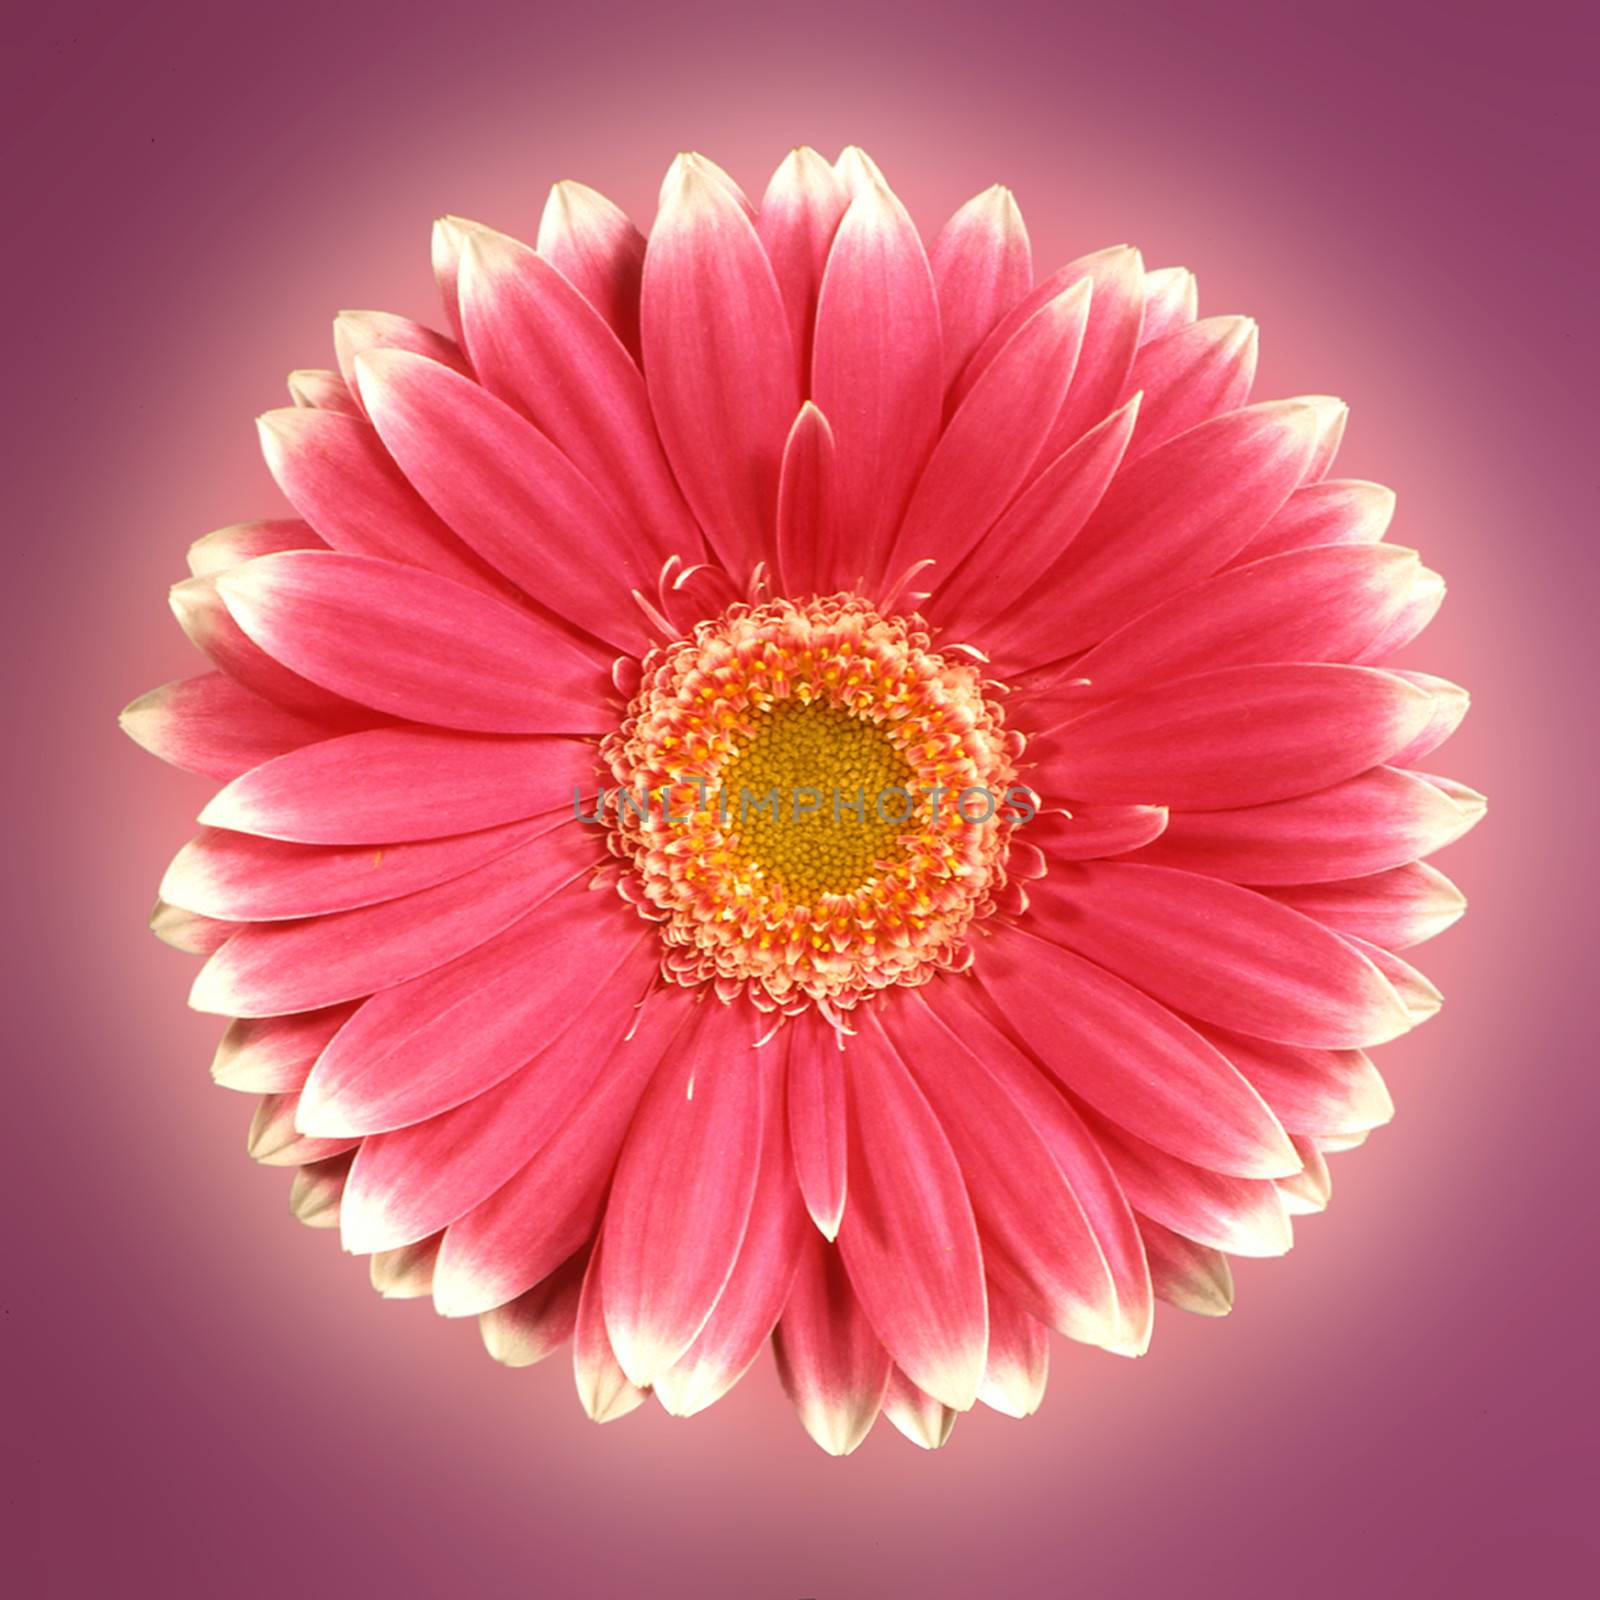 Beautiful and vibrantly colorful Flower Portraits  by george_stevenson